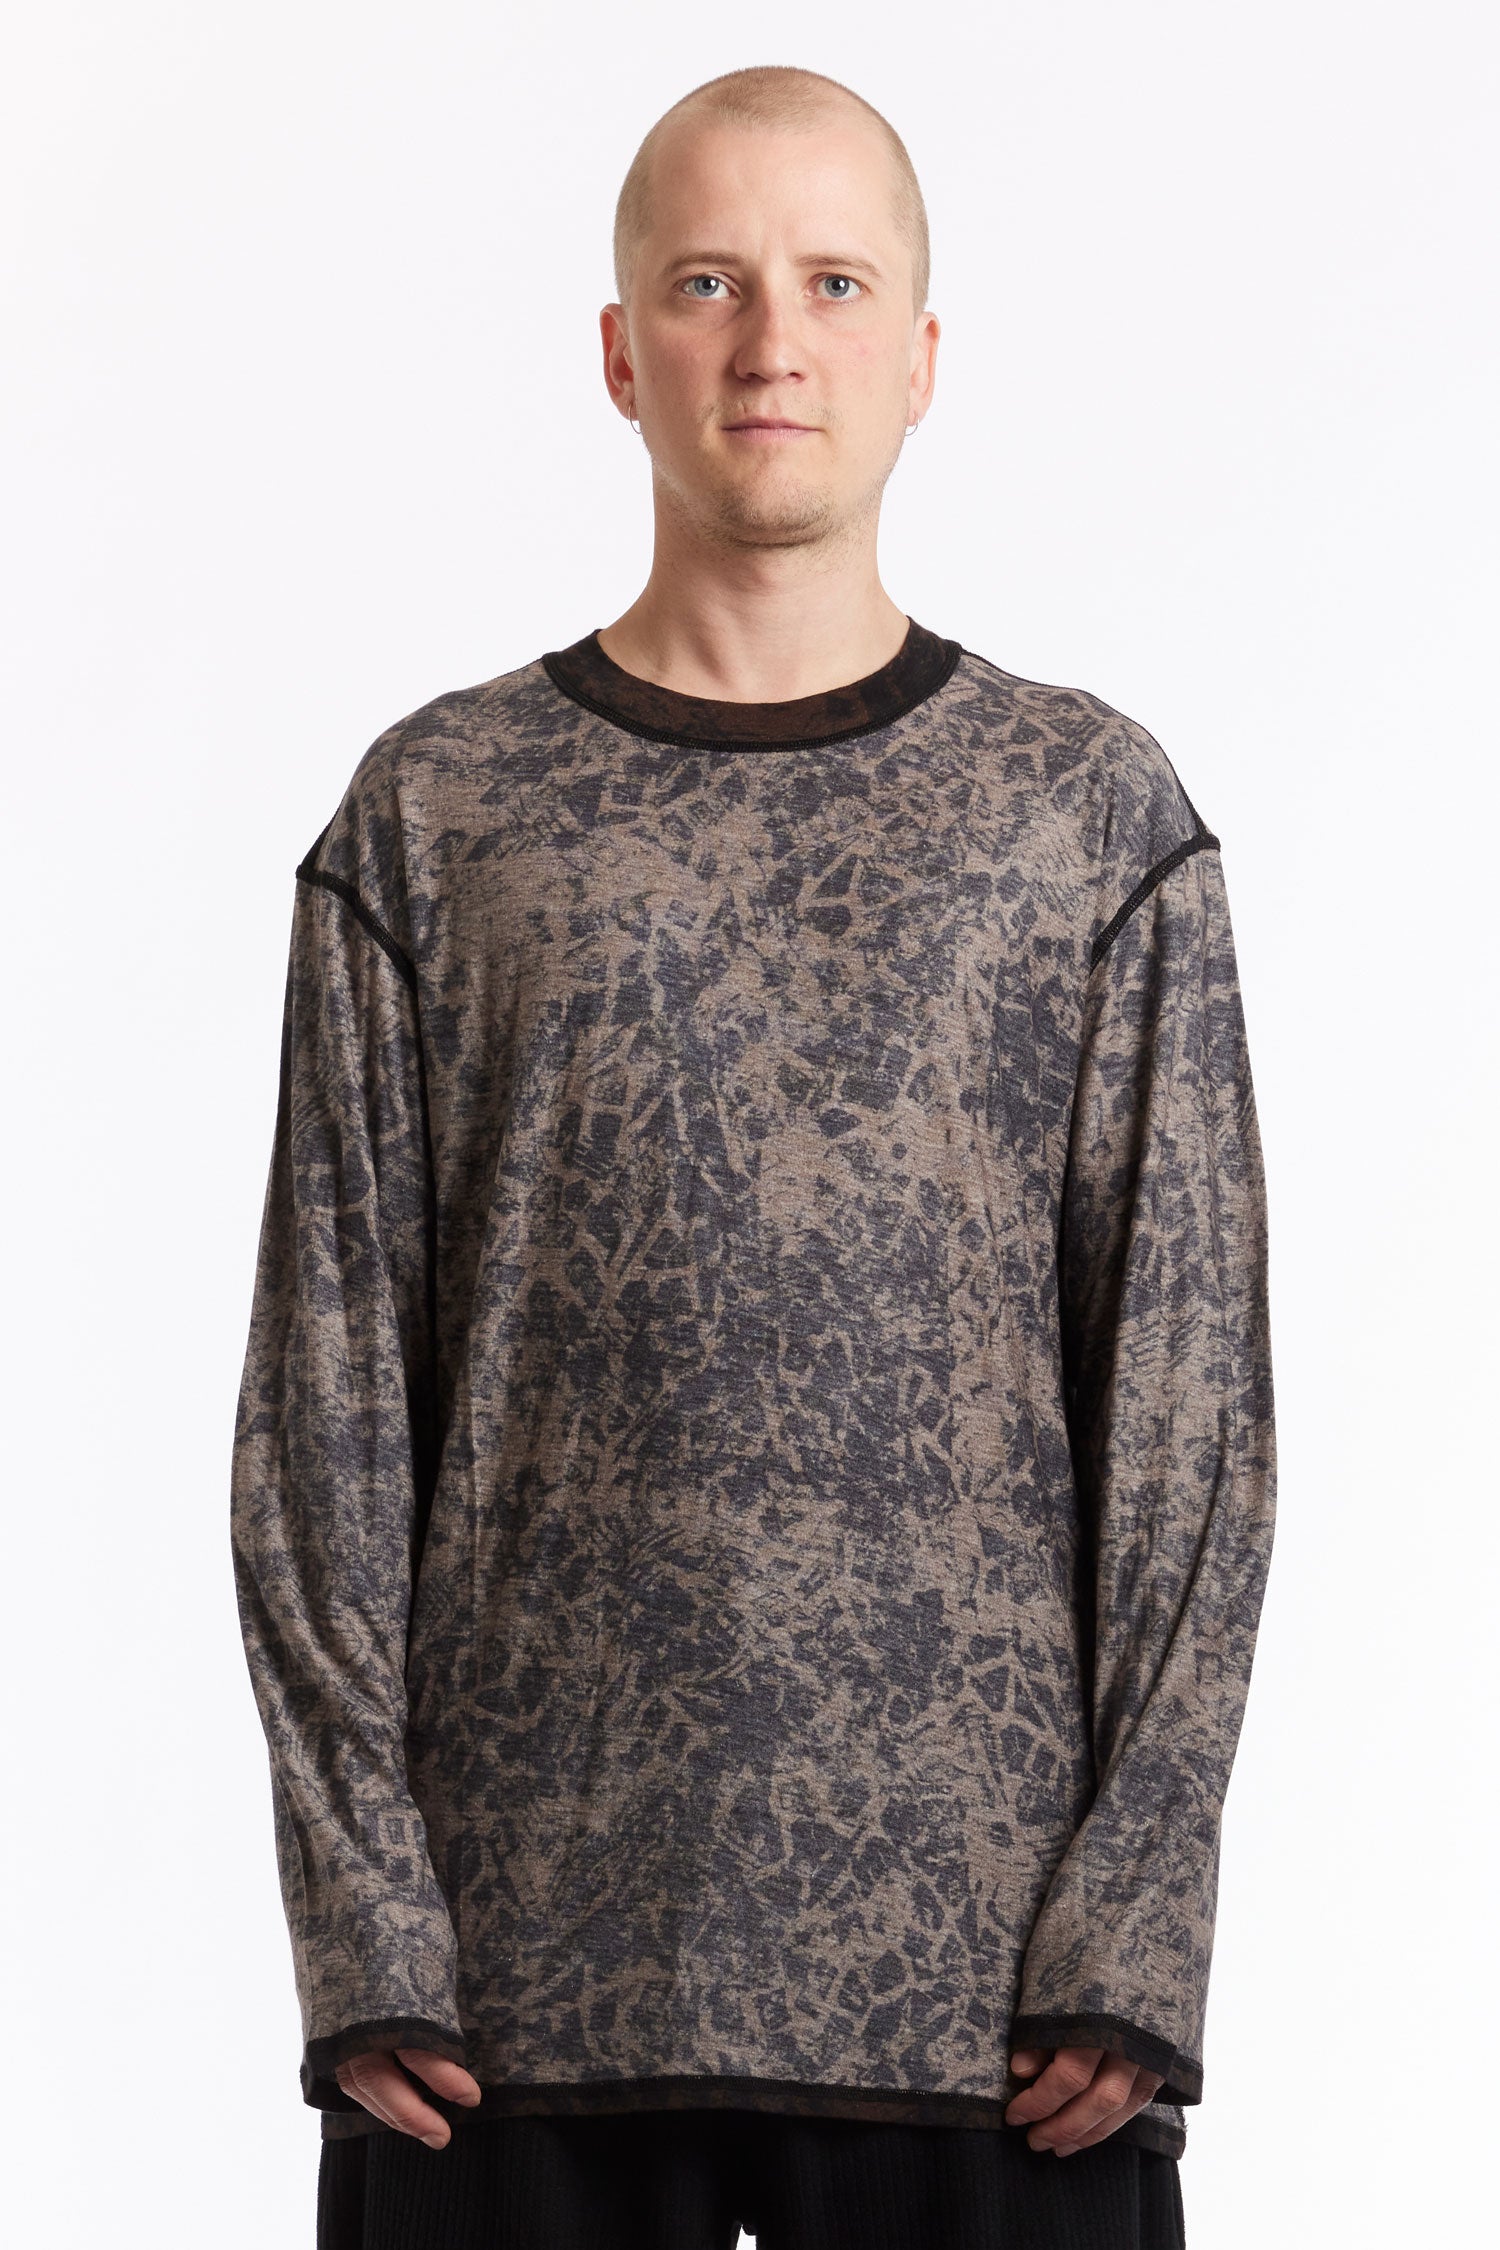 The AFFXWRKS - RECLAIM LONG SLEEVE TEE  available online with global shipping, and in PAM Stores Melbourne and Sydney.